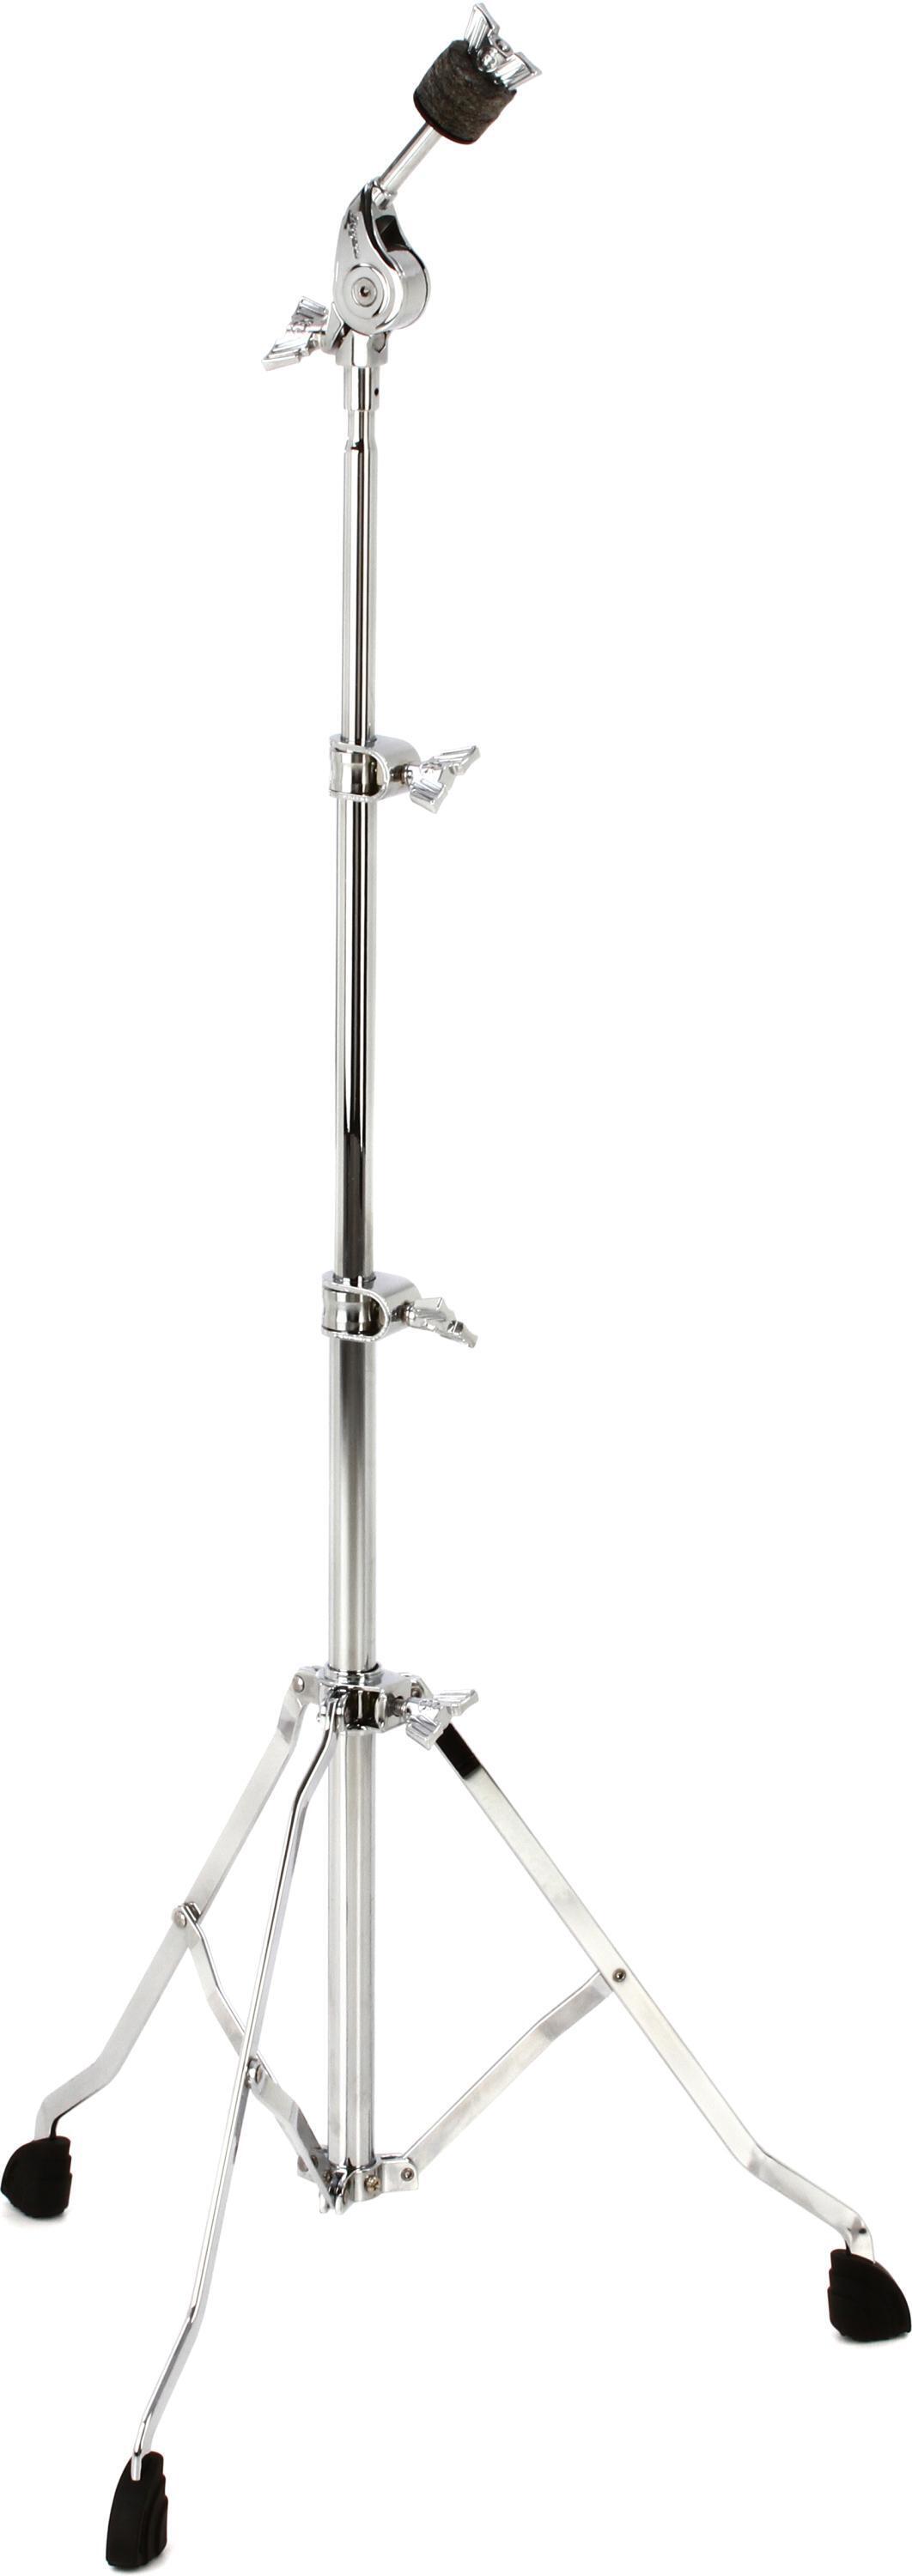 Rogers Drums RDH10 Dyno-Matic Straight Cymbal Stand - Single Braced